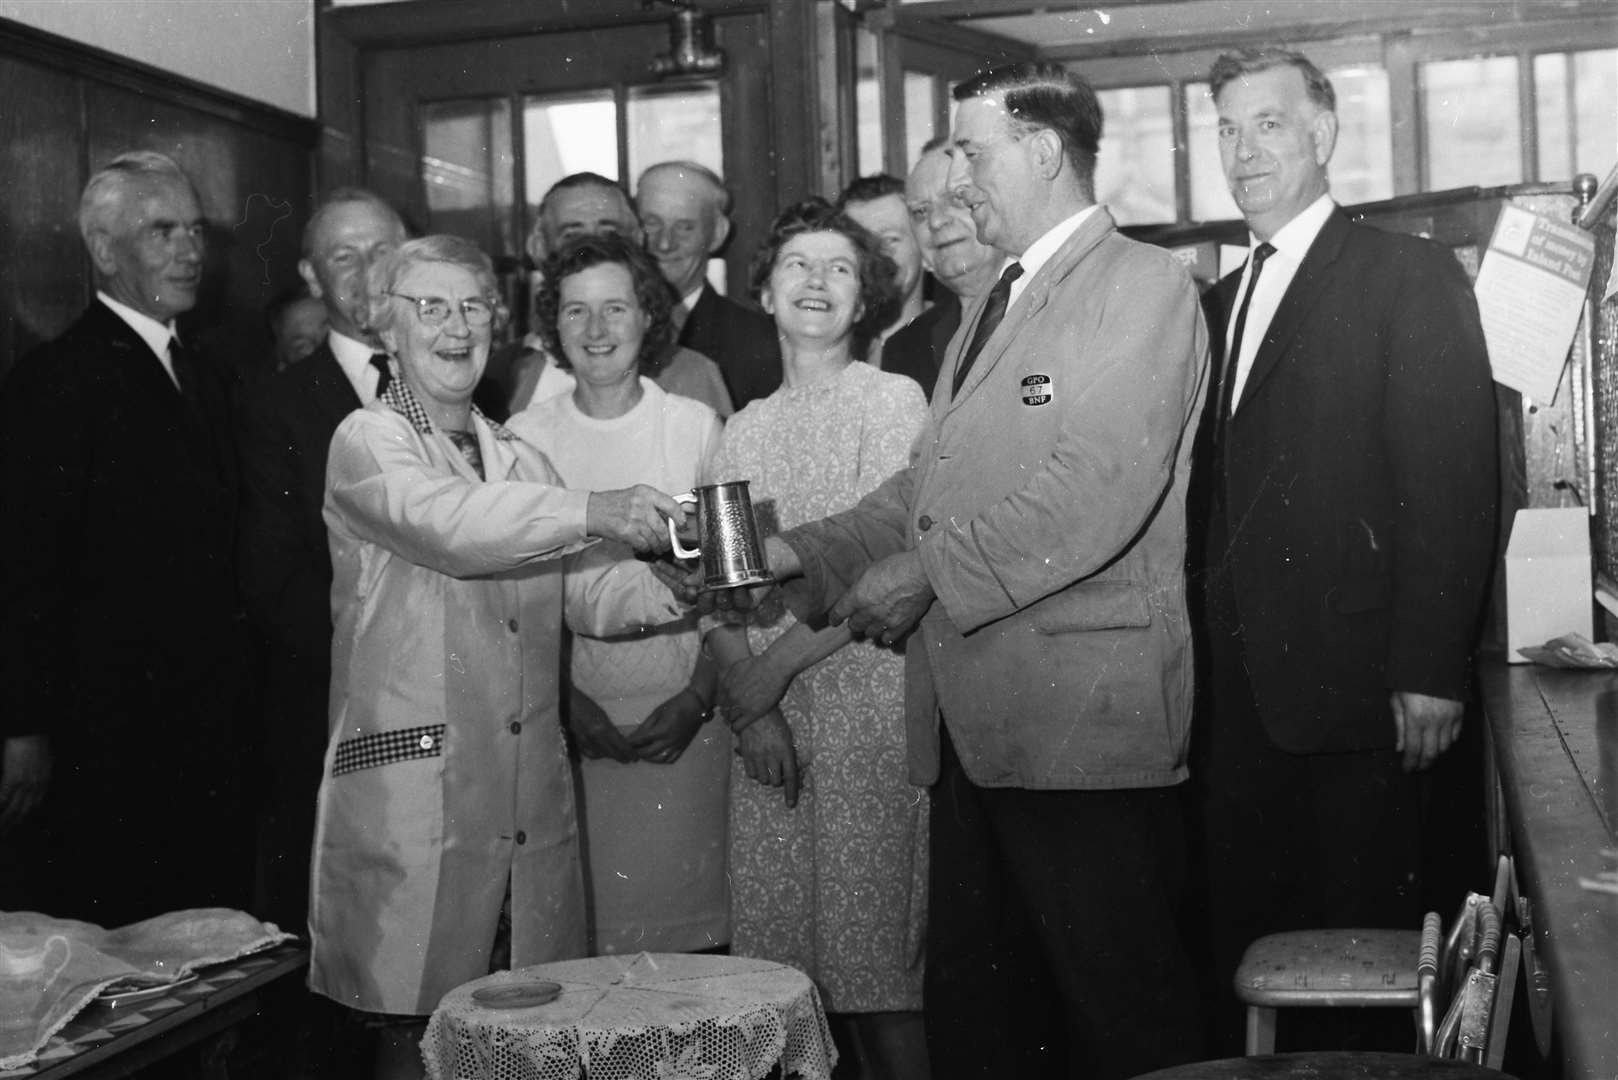 Bob Mcaulay receives a tankard from Cullen postmistress Jeannie Milne. Standing next to her is her eventual successor in the role, Kathleen Ross.